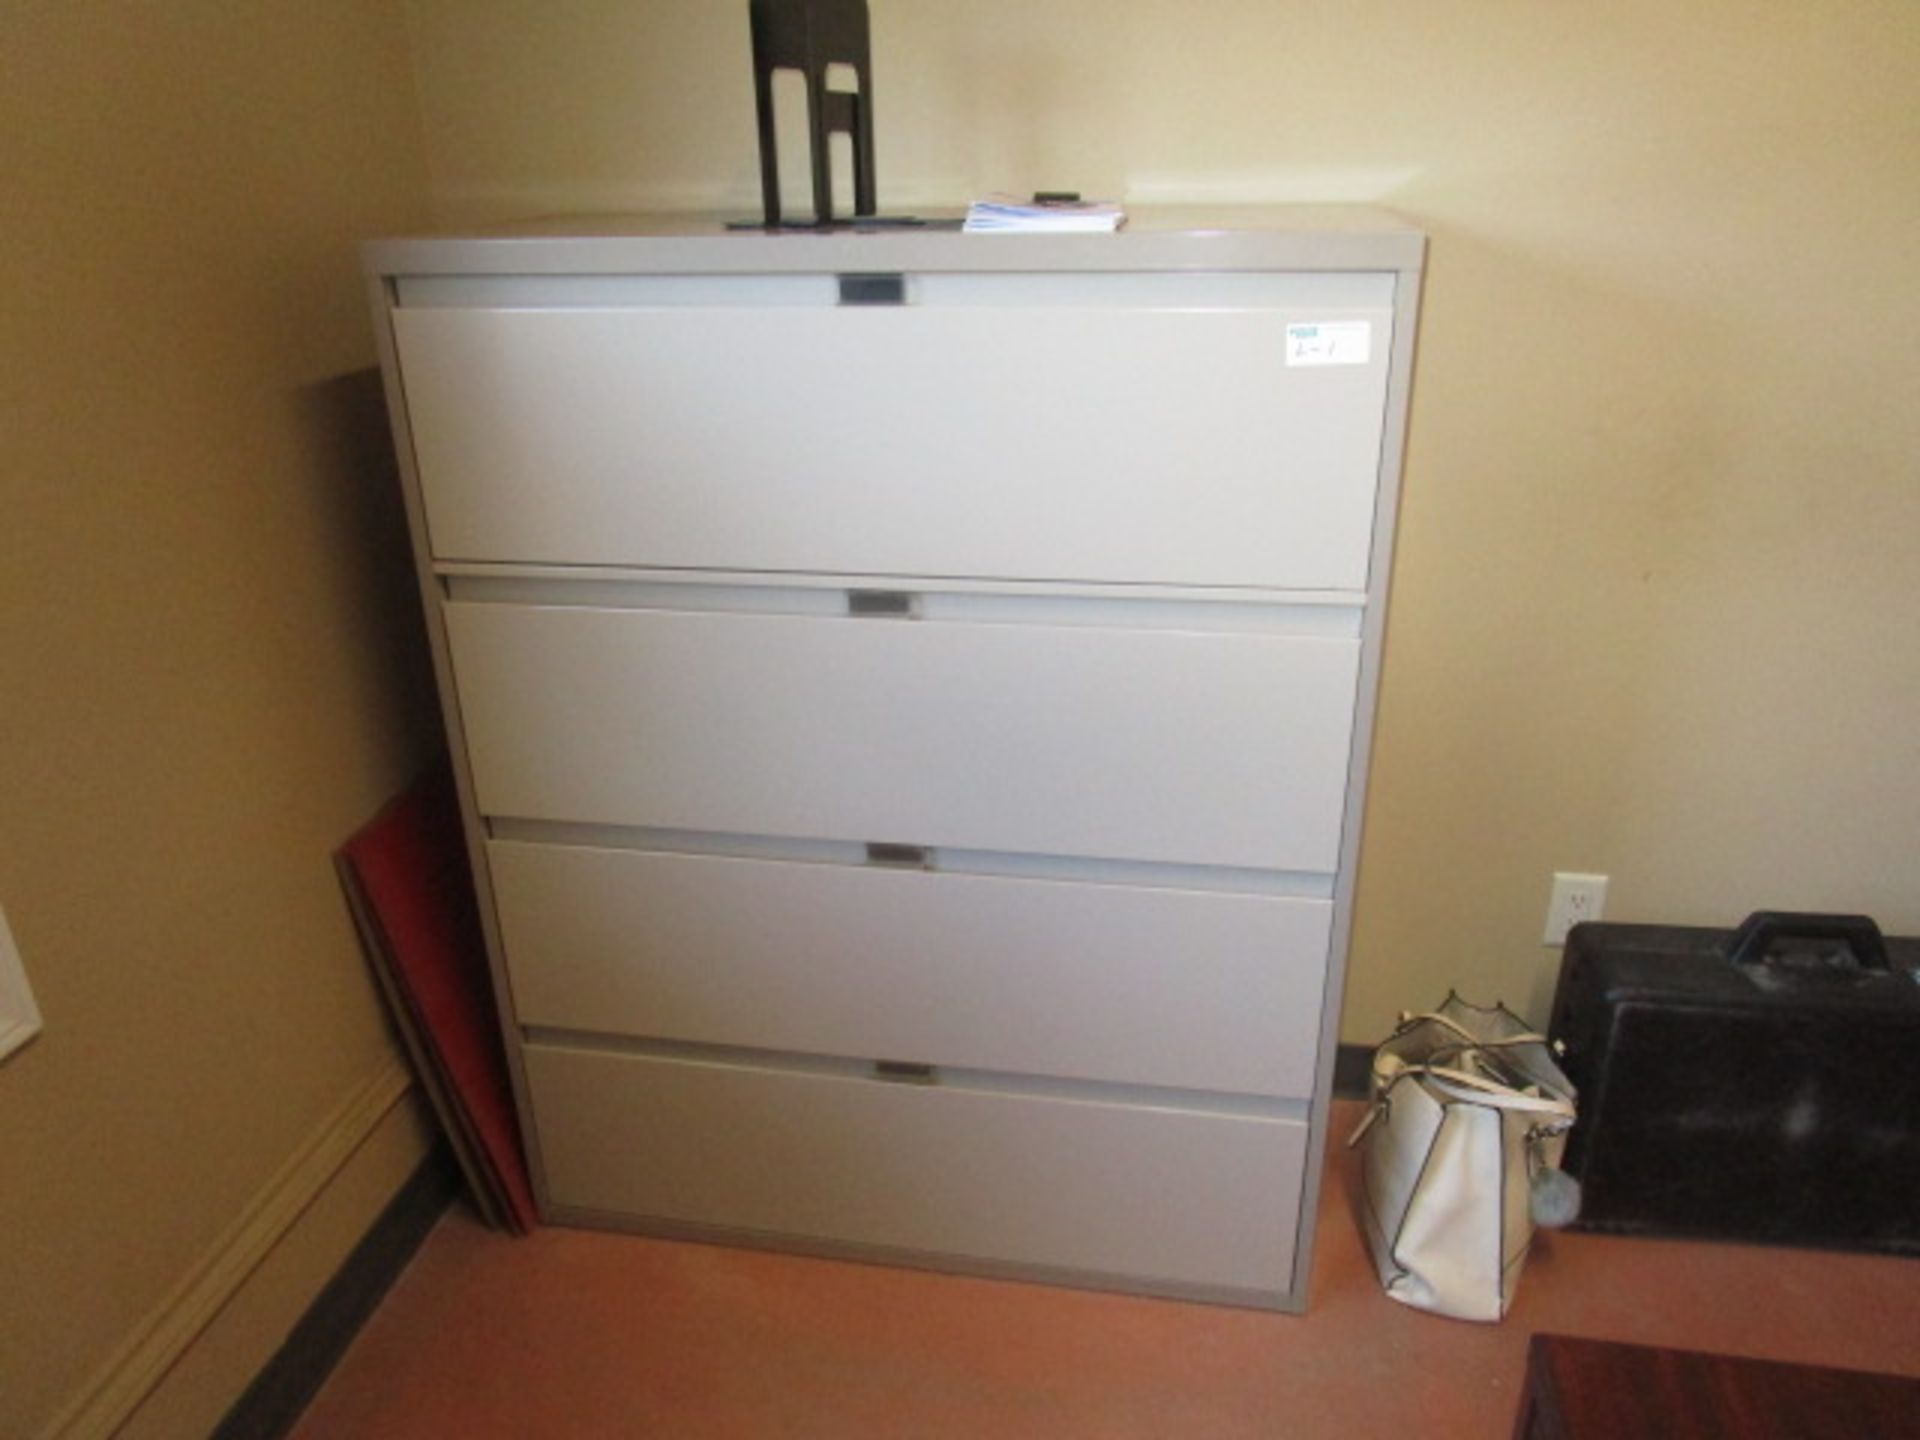 Complete Office Contents - includes Desk with Overshelf, 3 Chairs, 4 Door lateral filing cabinets, - Image 2 of 5